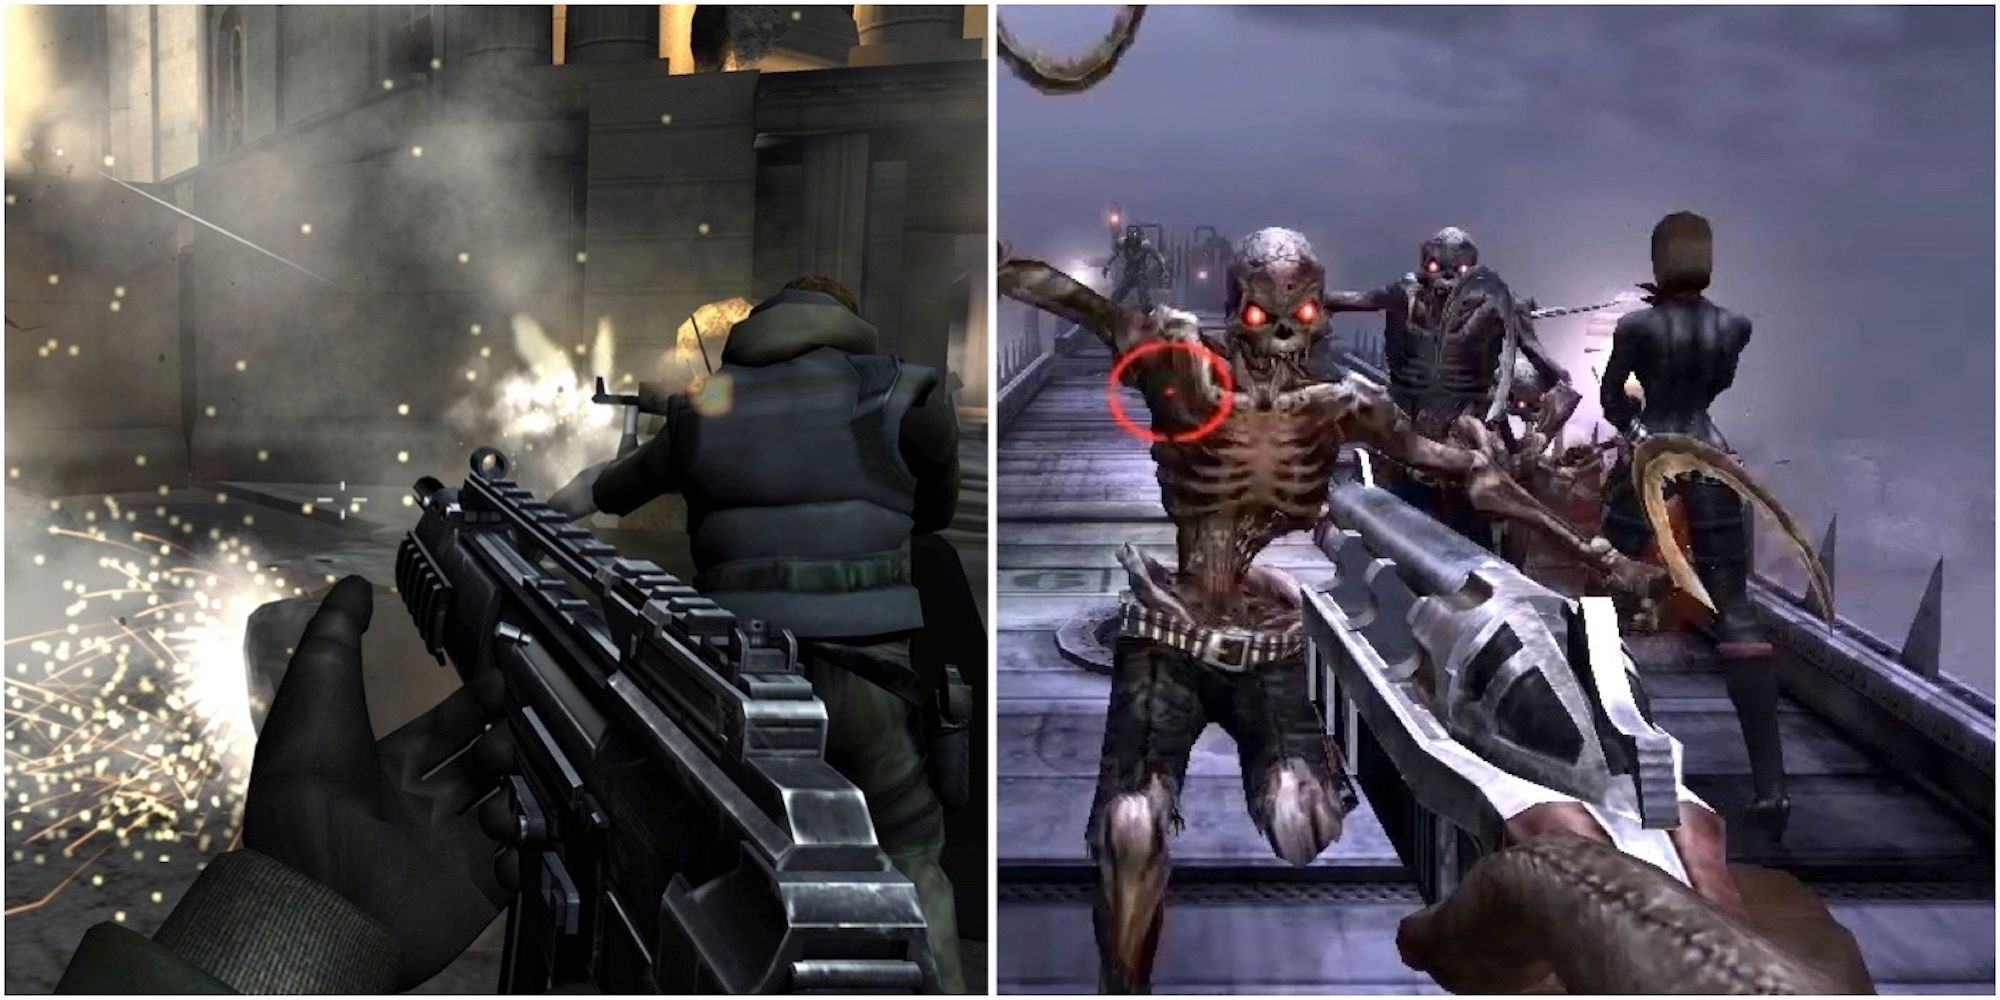 Can you recommend an open first person shooter game? - Quora